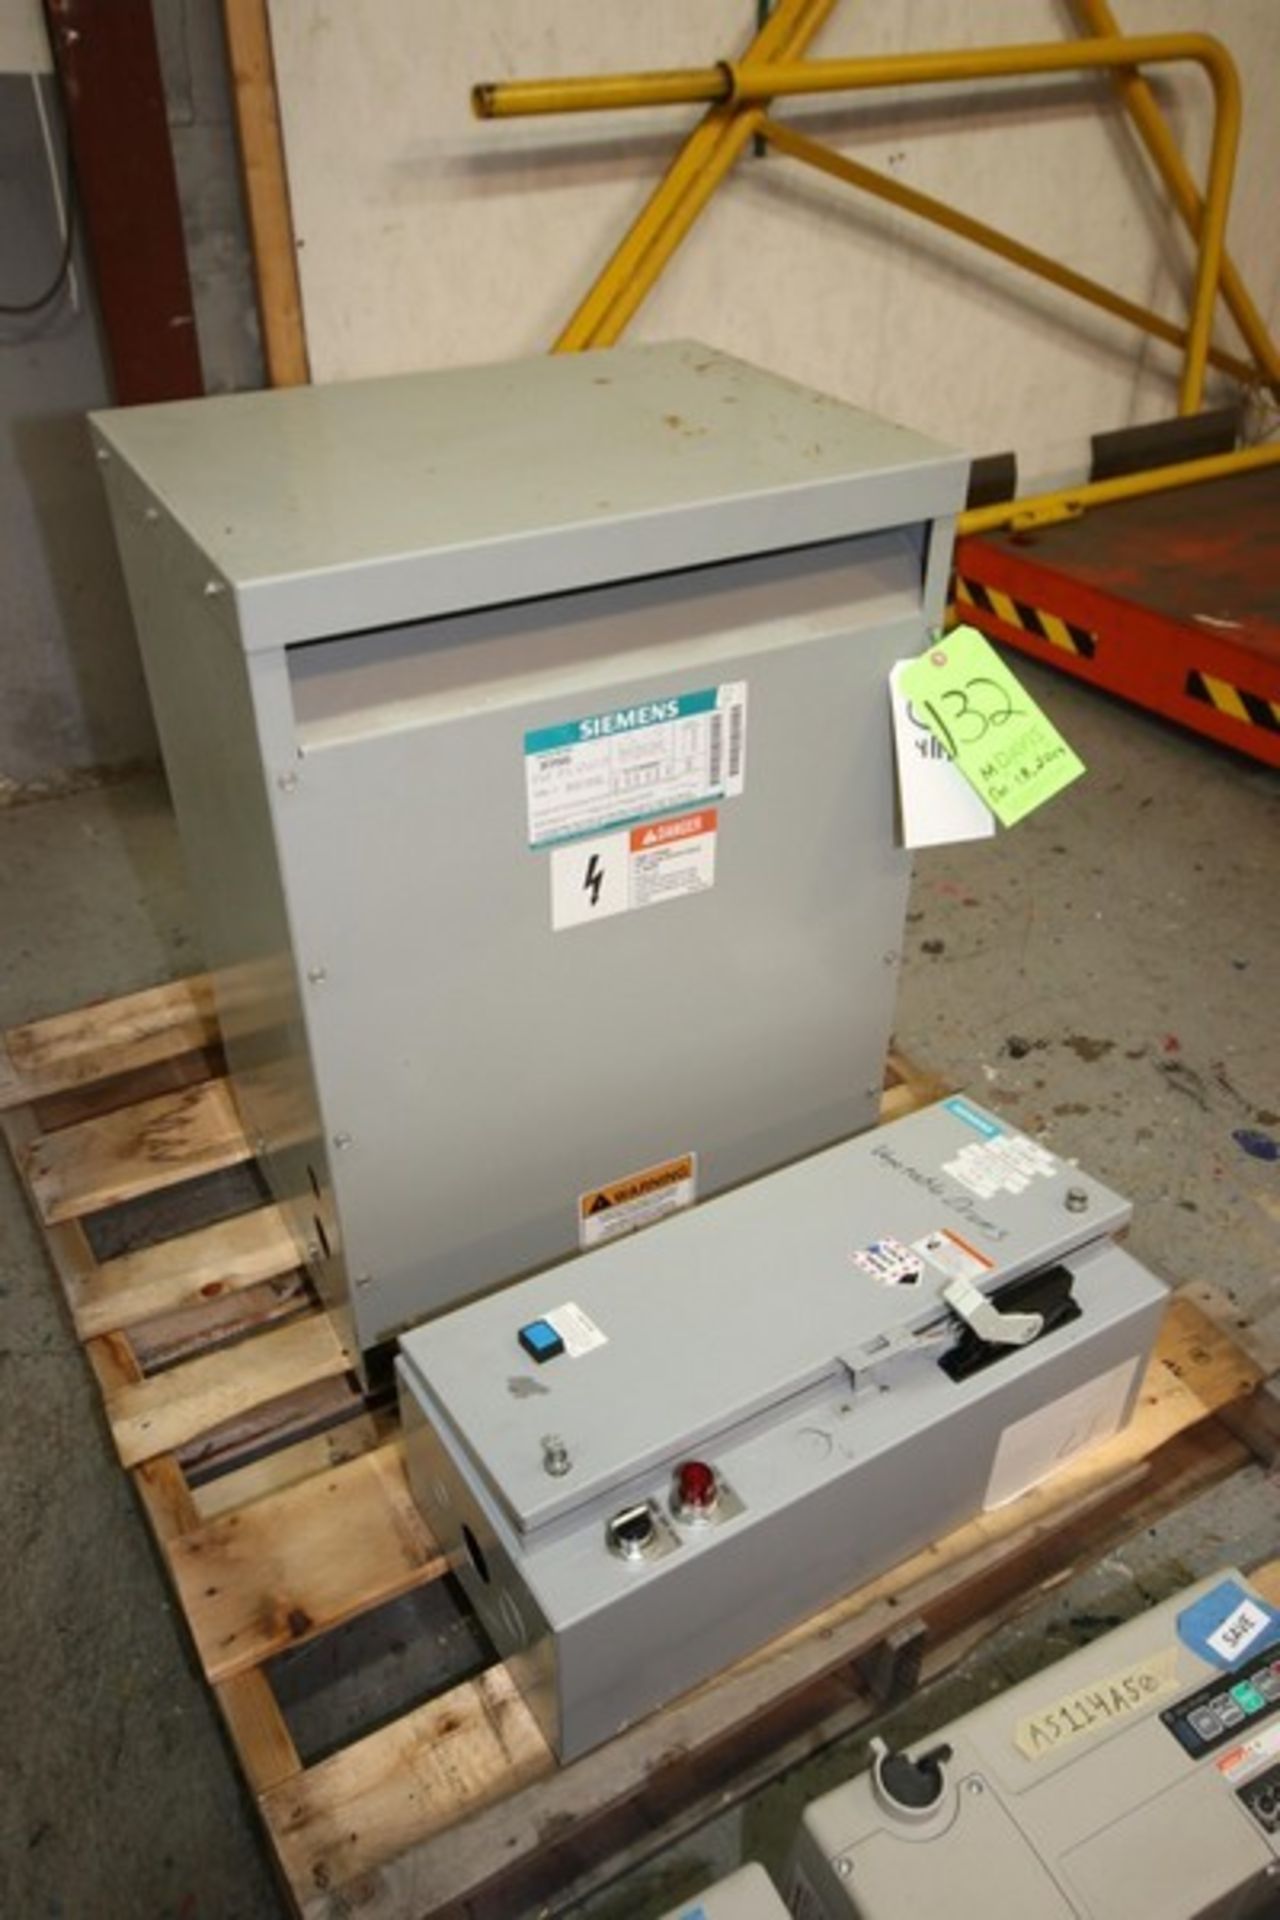 Siemens Transformer, with Siemens Safety Switch, Transformer: CAT. No. 3F3Y045, 45.0 KVA, 3 Phase ( - Image 2 of 8